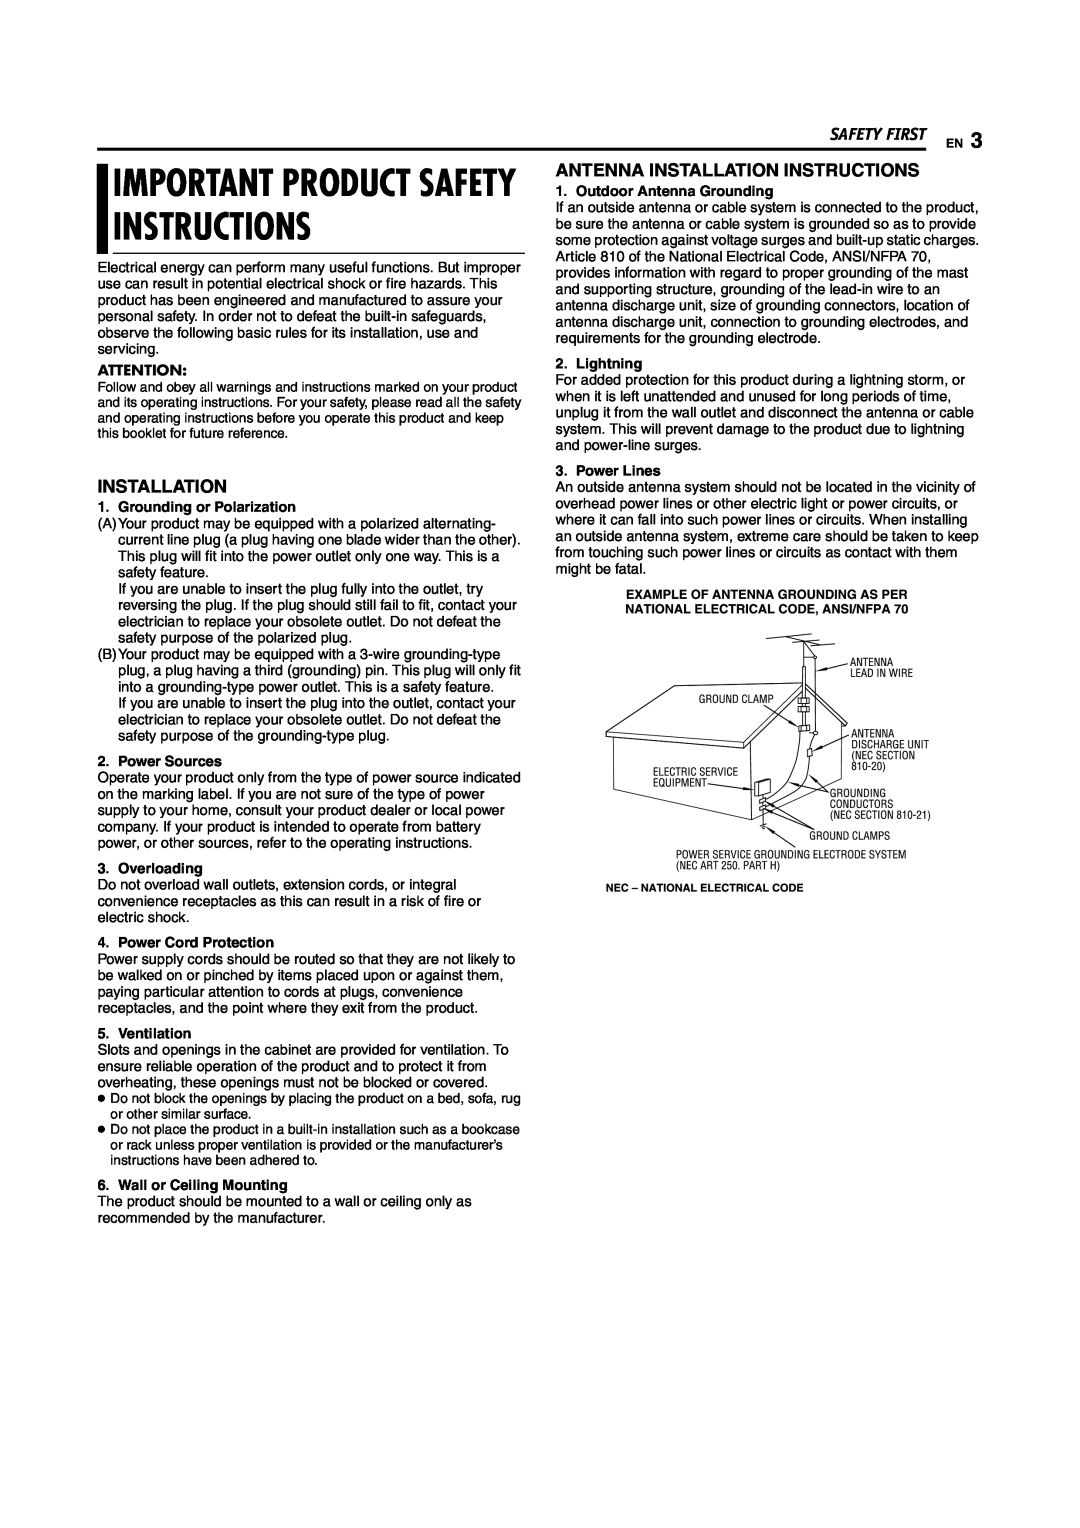 JVC DR-MV5S manual Important Product Safety, Antenna Installation Instructions, Safety First En, Outdoor Antenna Grounding 